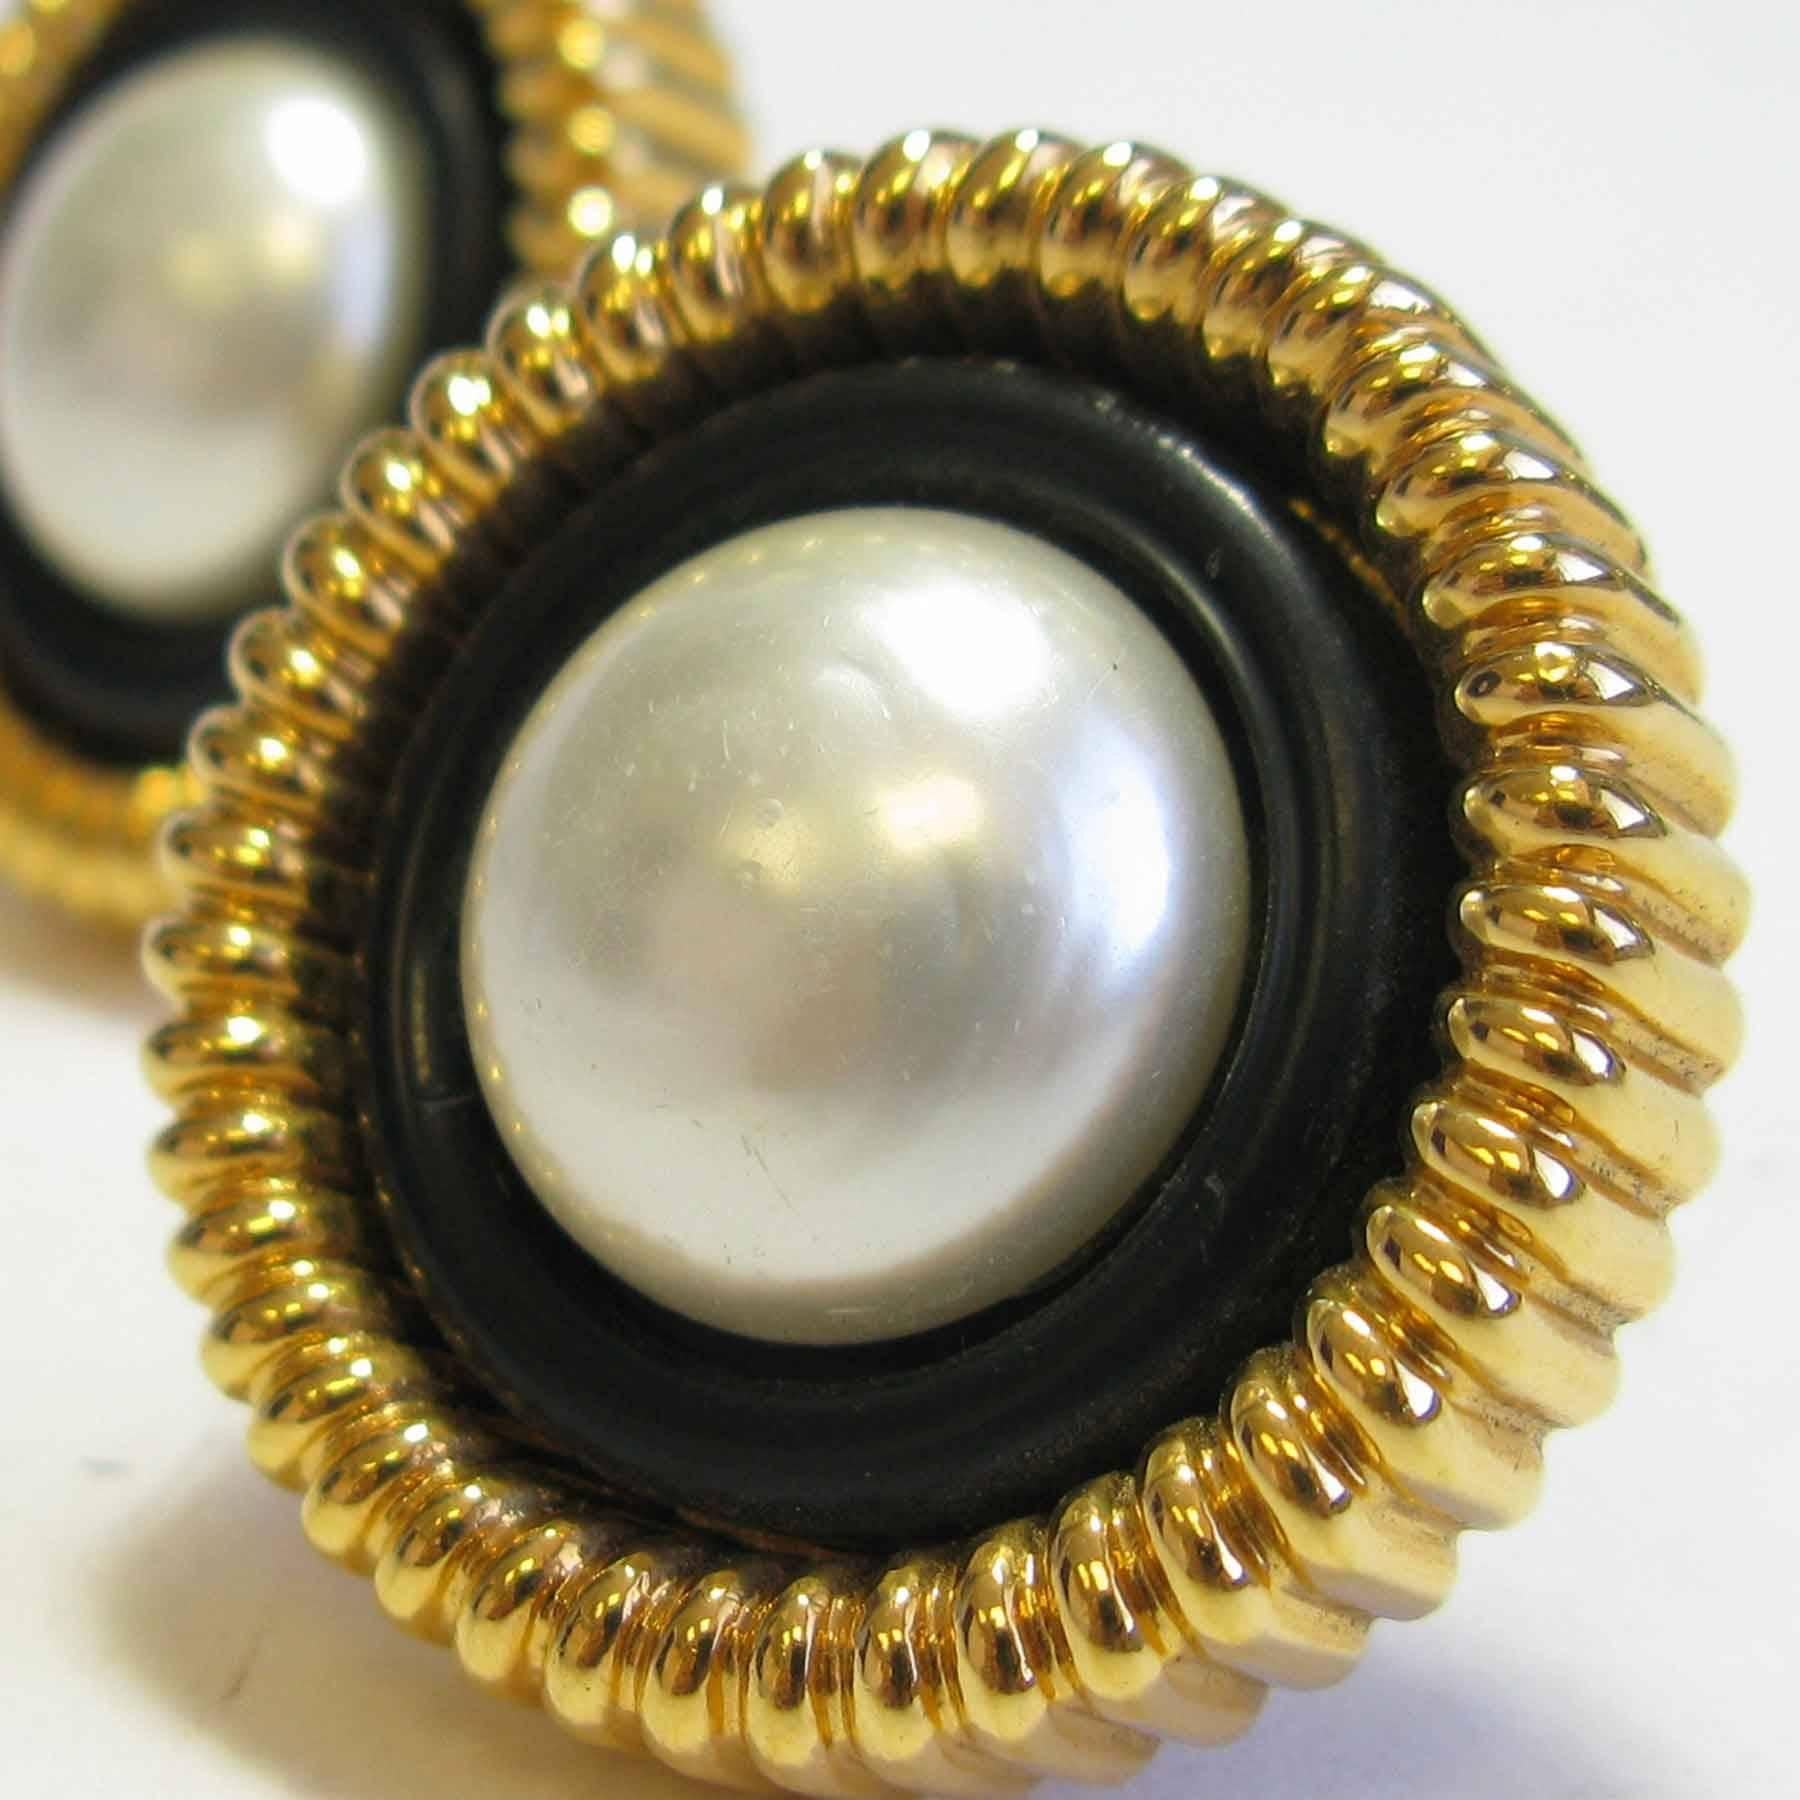 Women's Vintage CHANEL Round Clip-on Earrings in Gilded Metal and Pearl